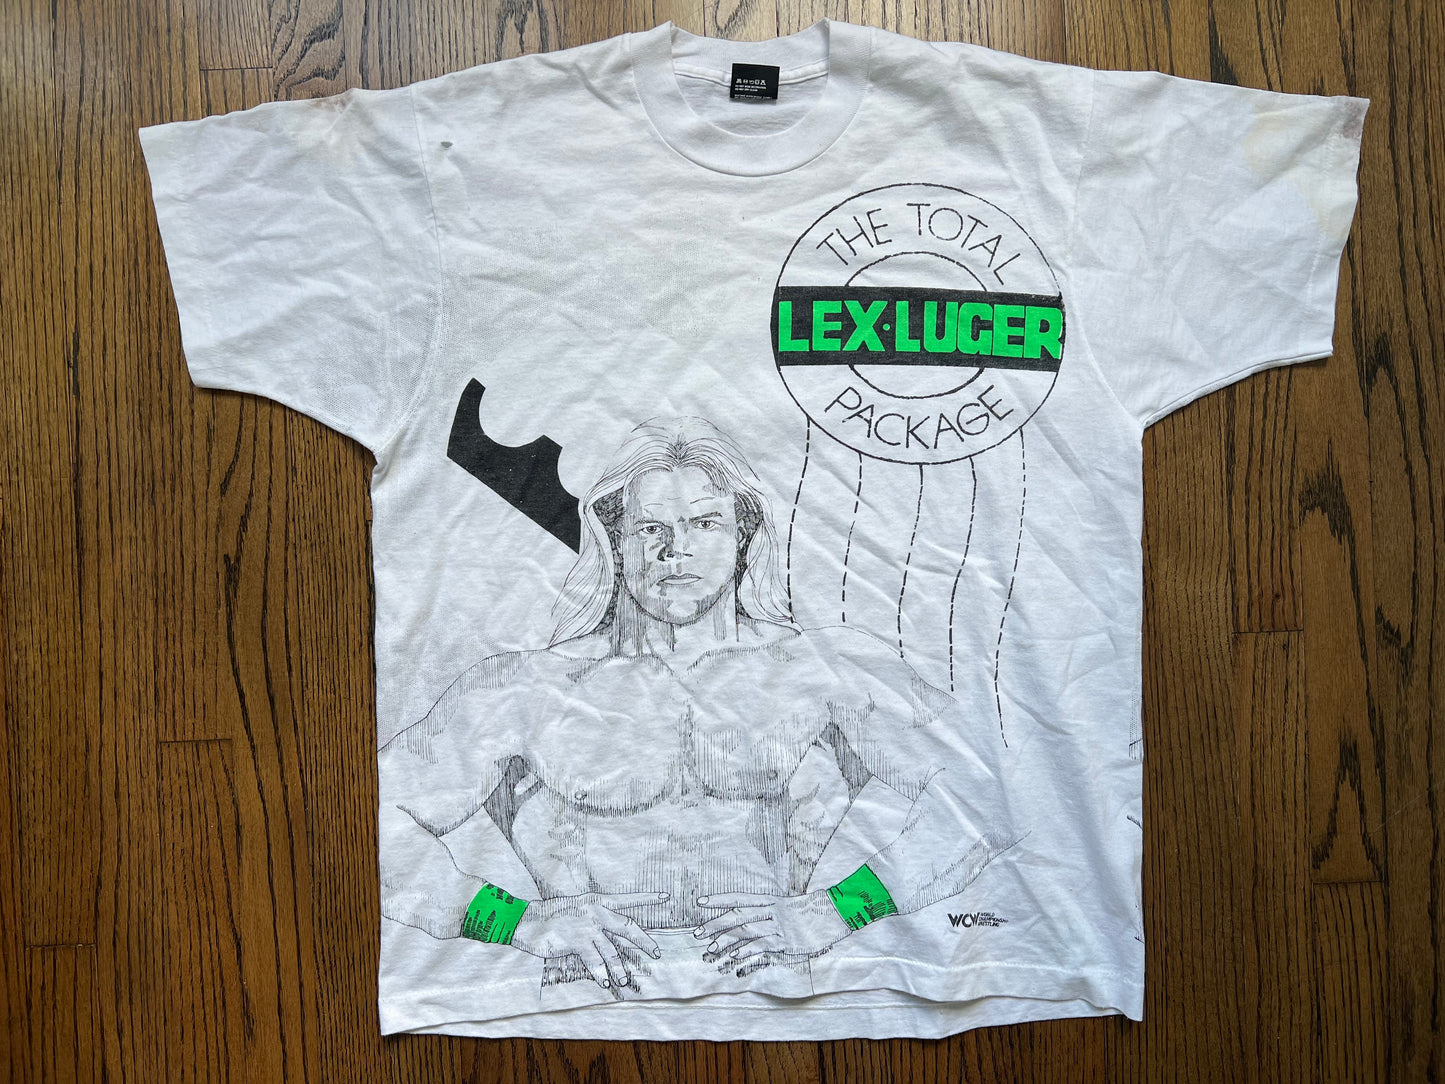 1991 WCW “The Total Package” Lex Luger shirt